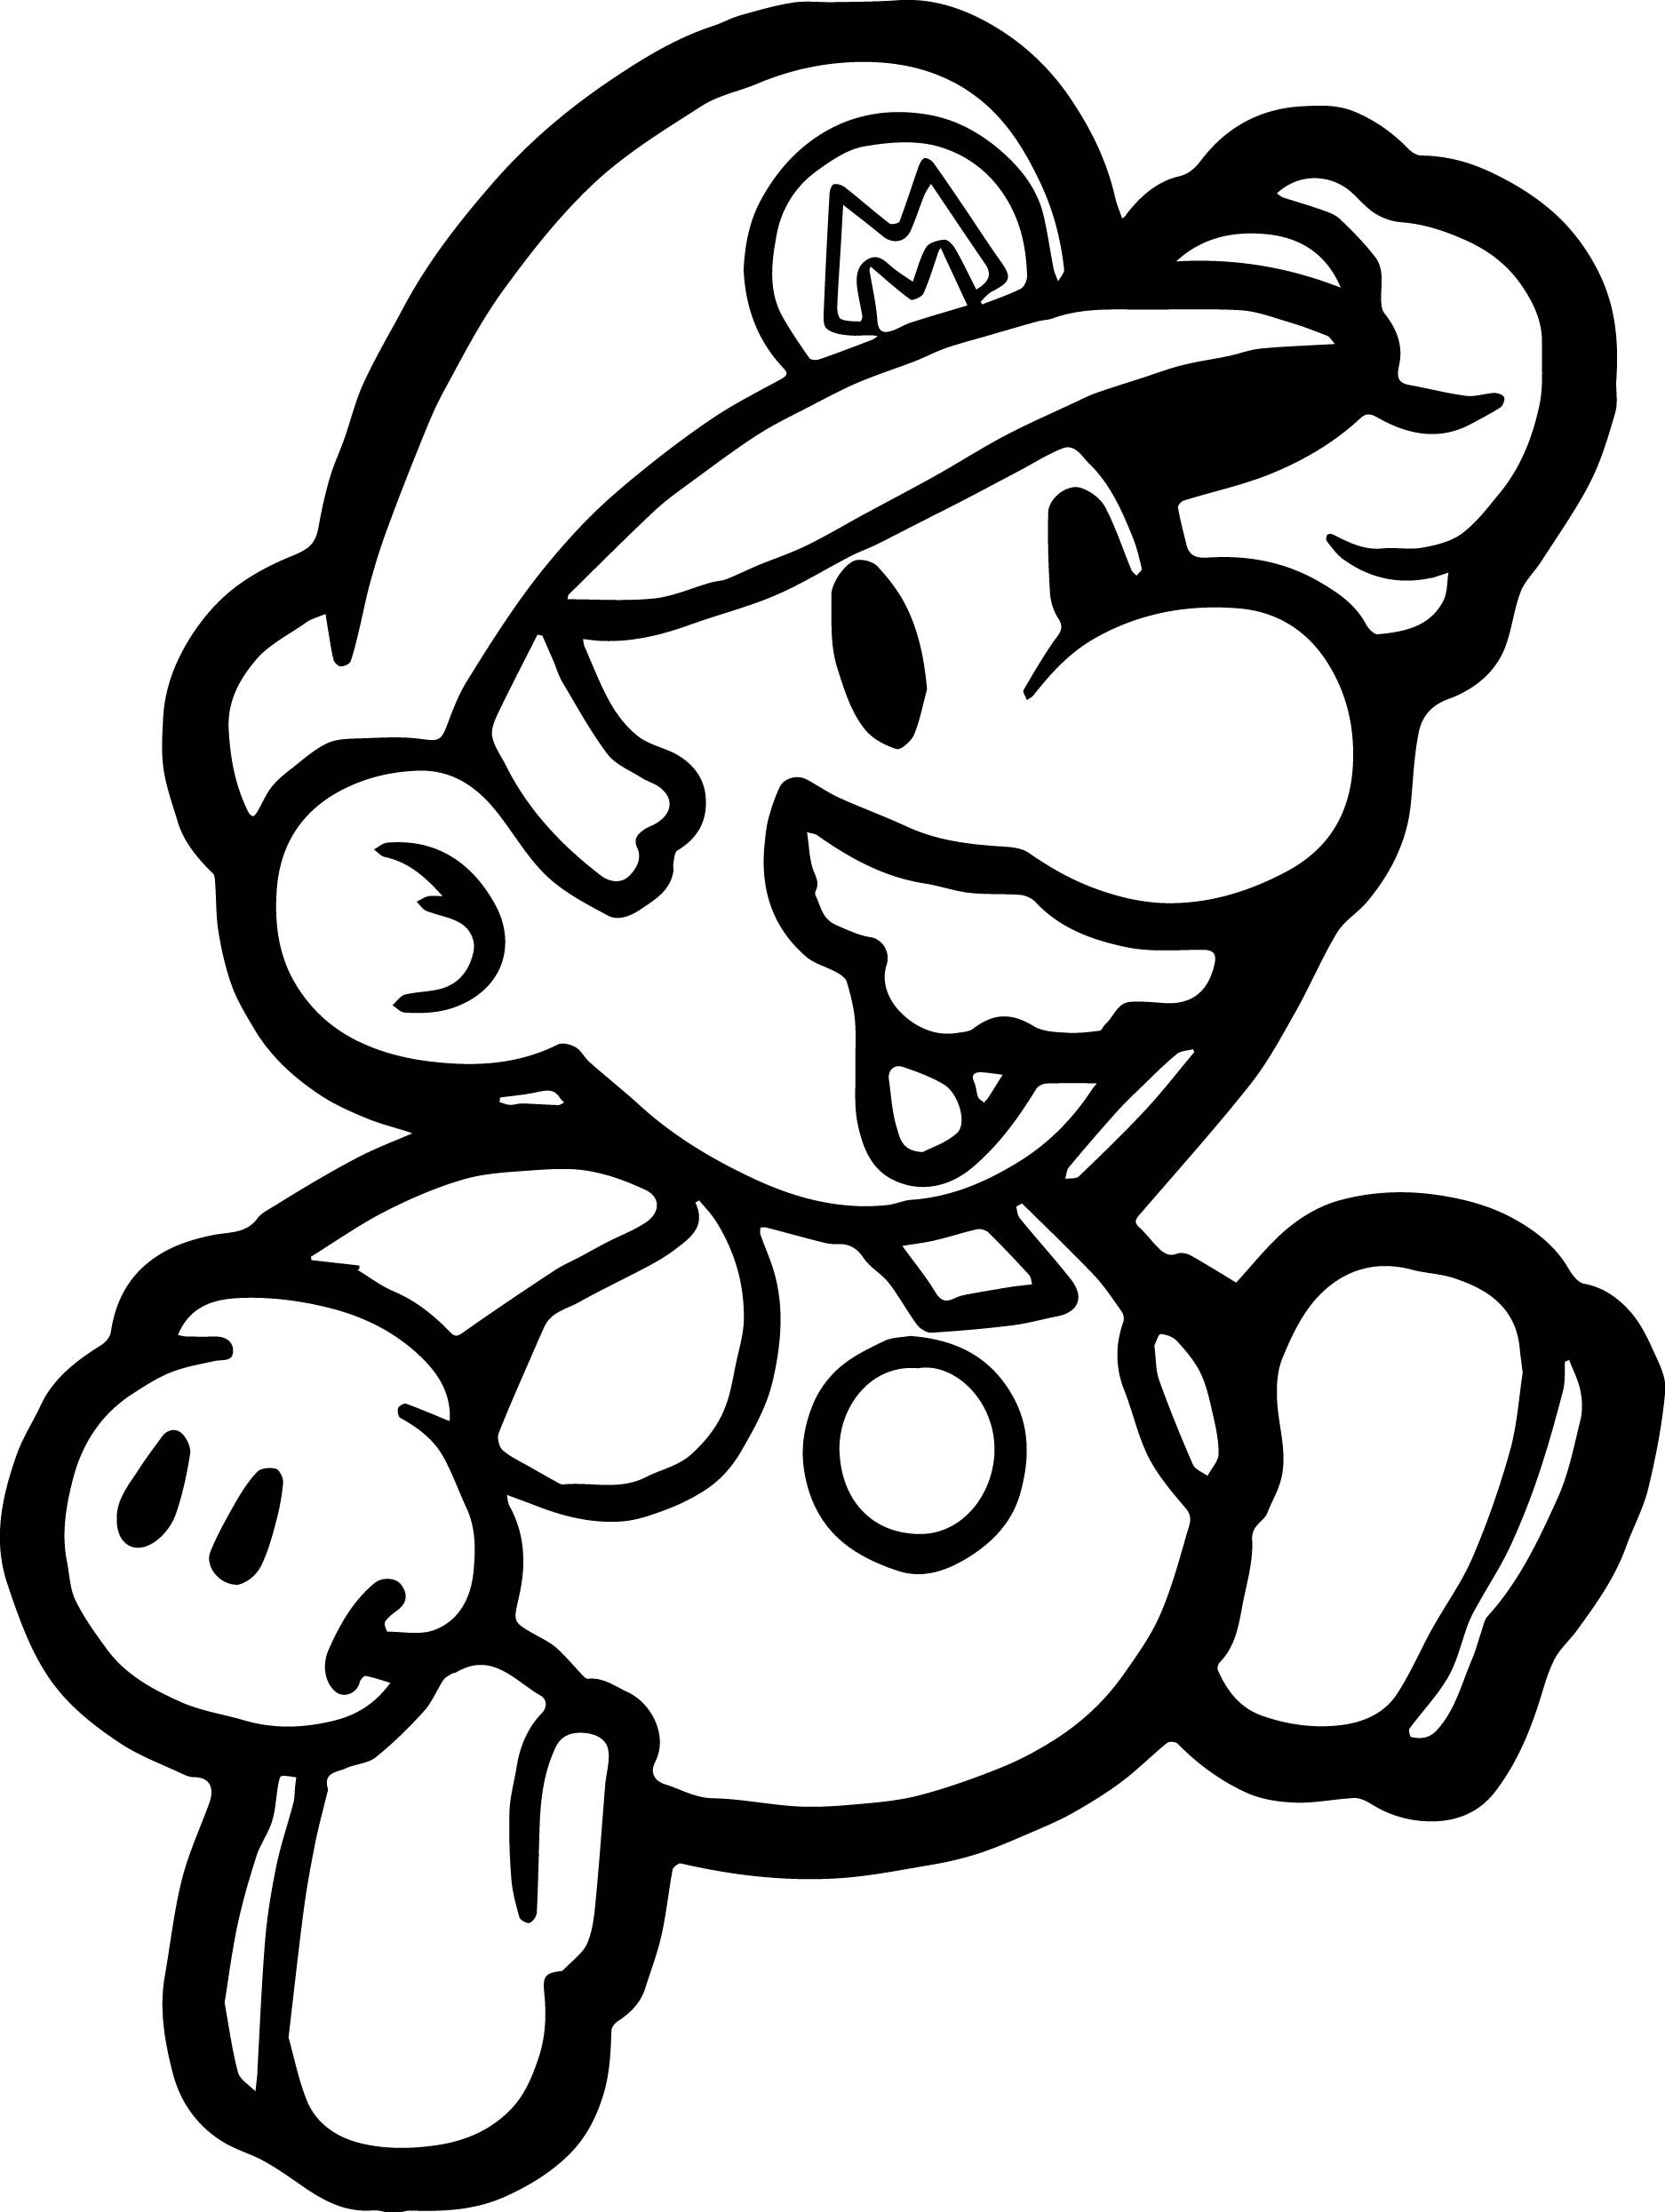 Super Paper Mario Coloring Pages at GetDrawings Free download